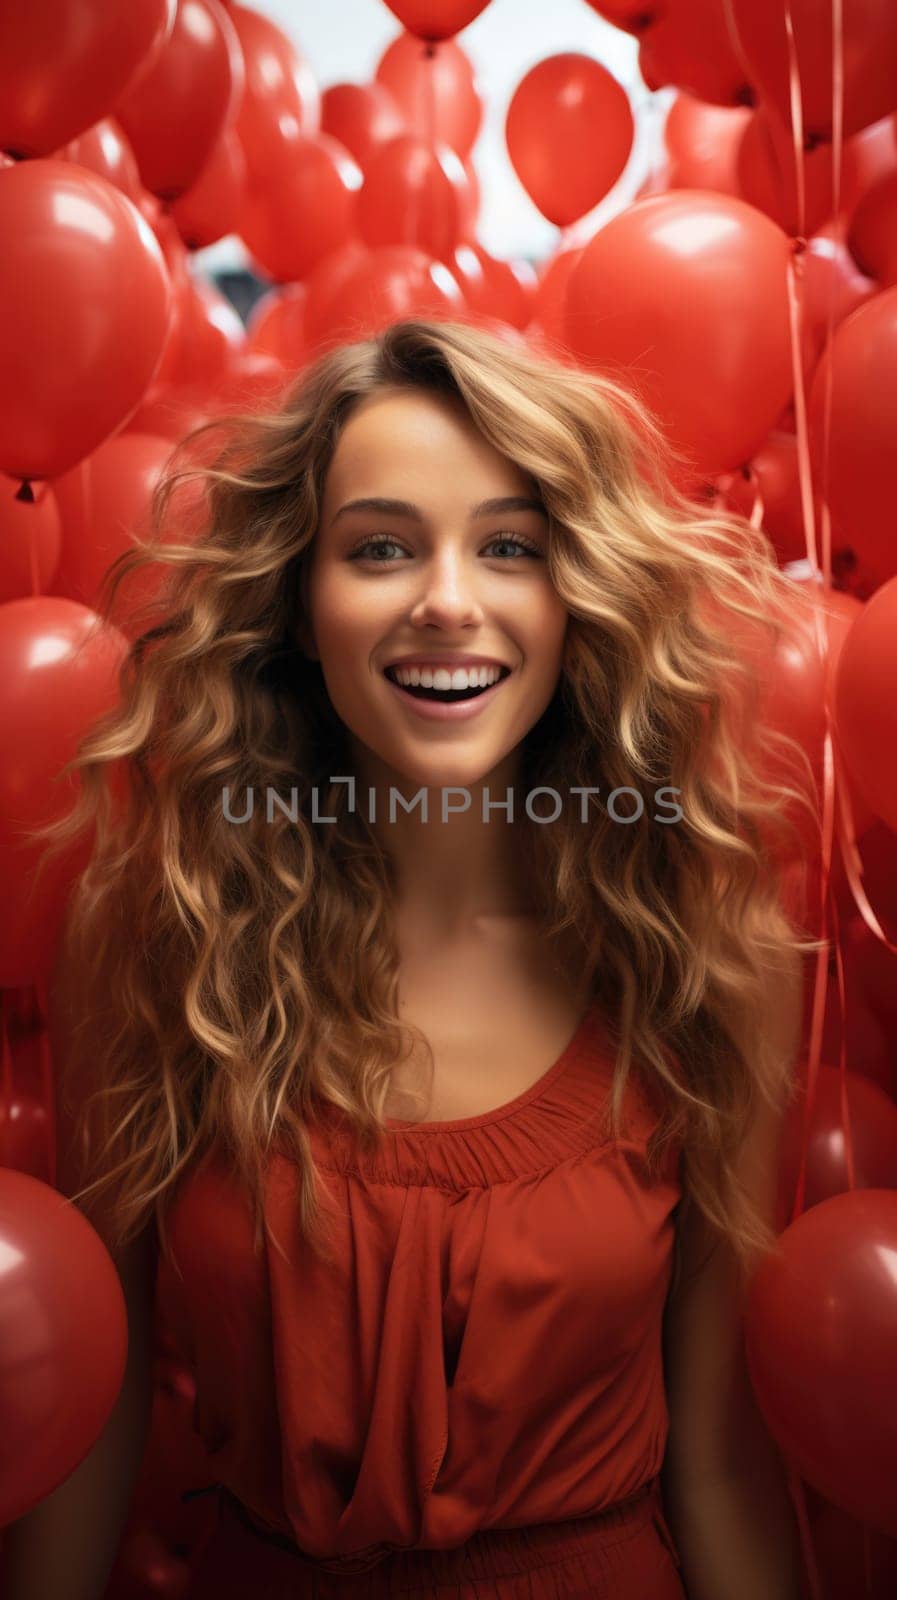 Woman Standing in Front of Red Balloons by but_photo